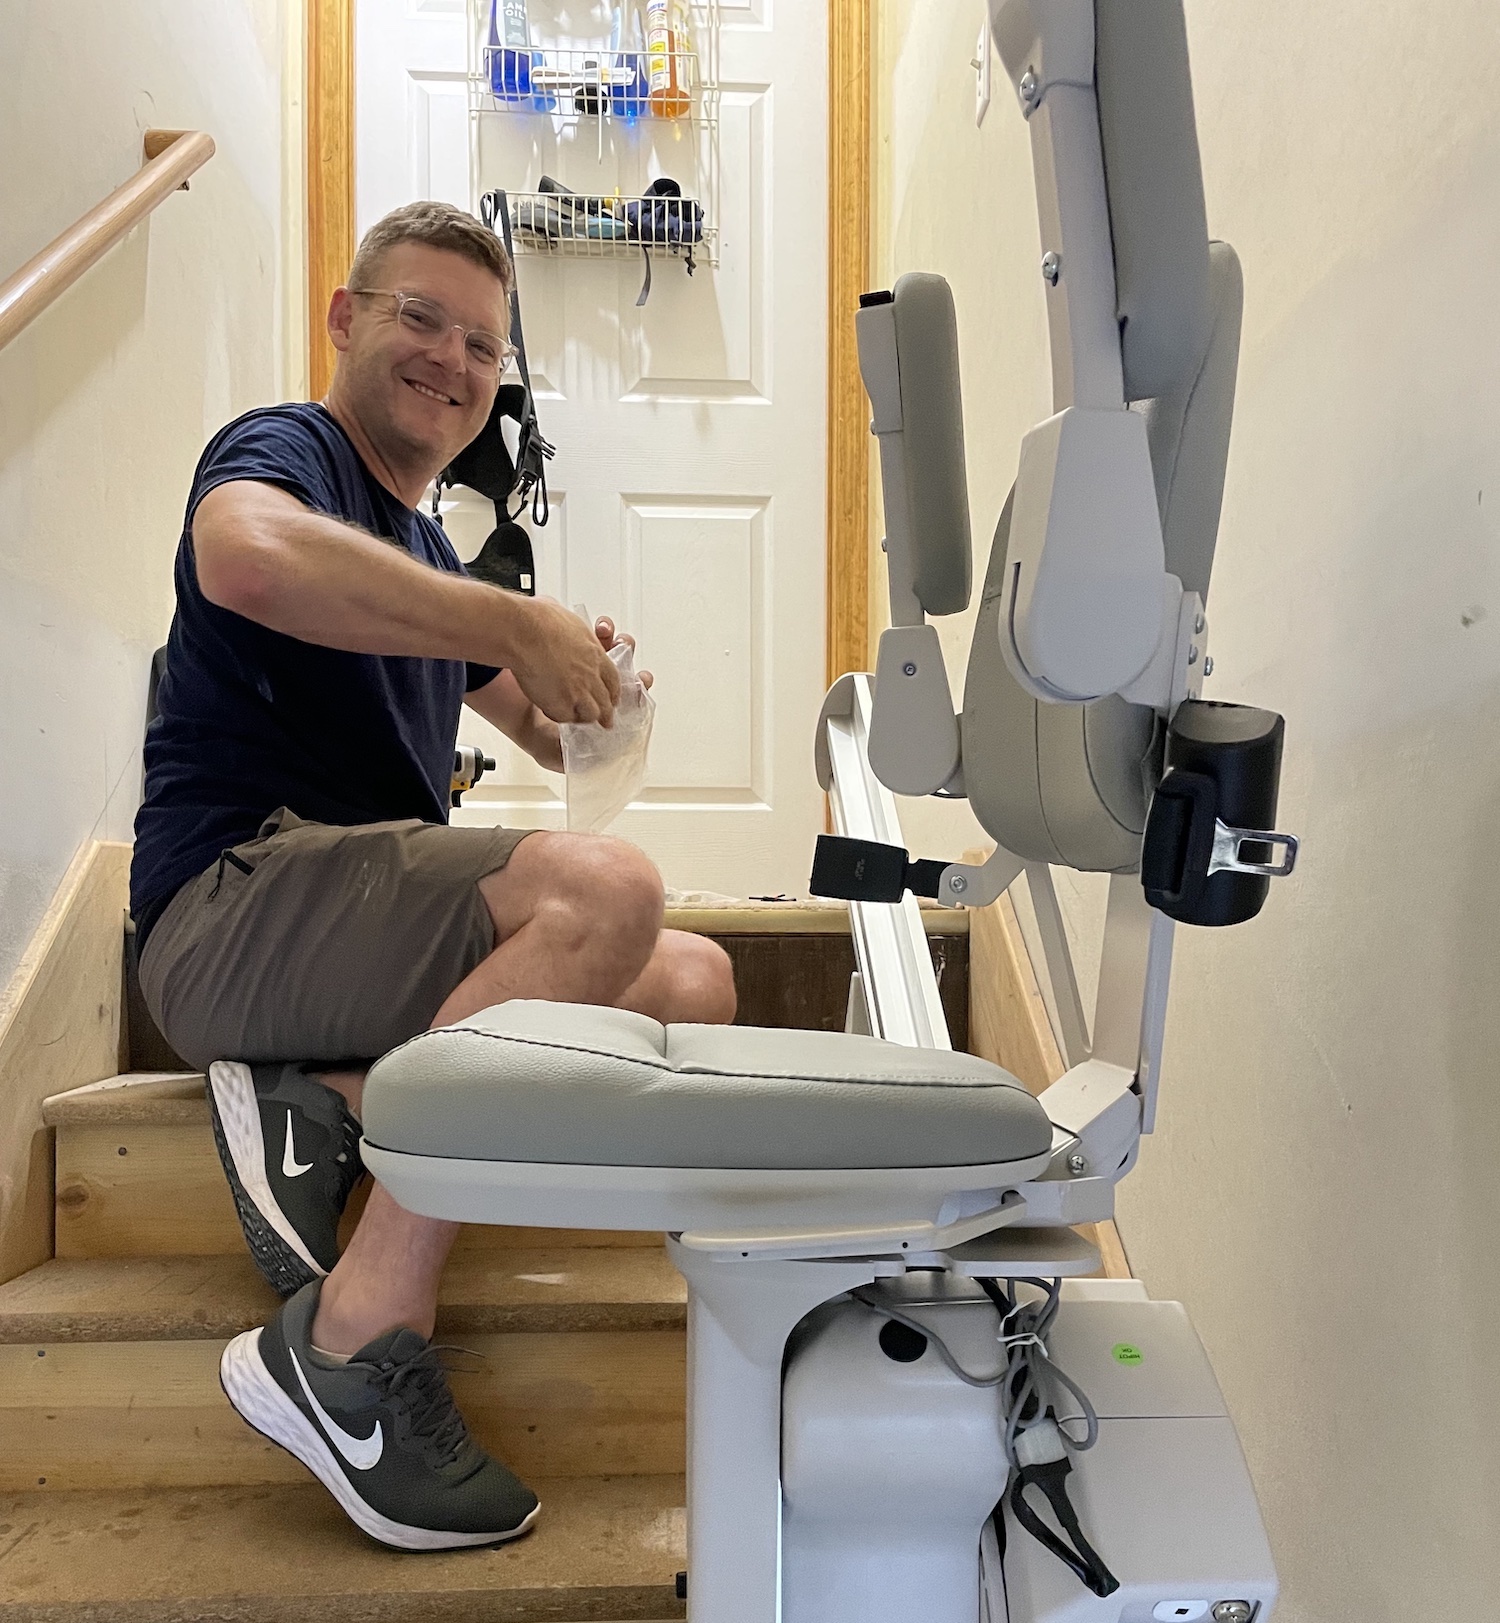 man working on a stair lift